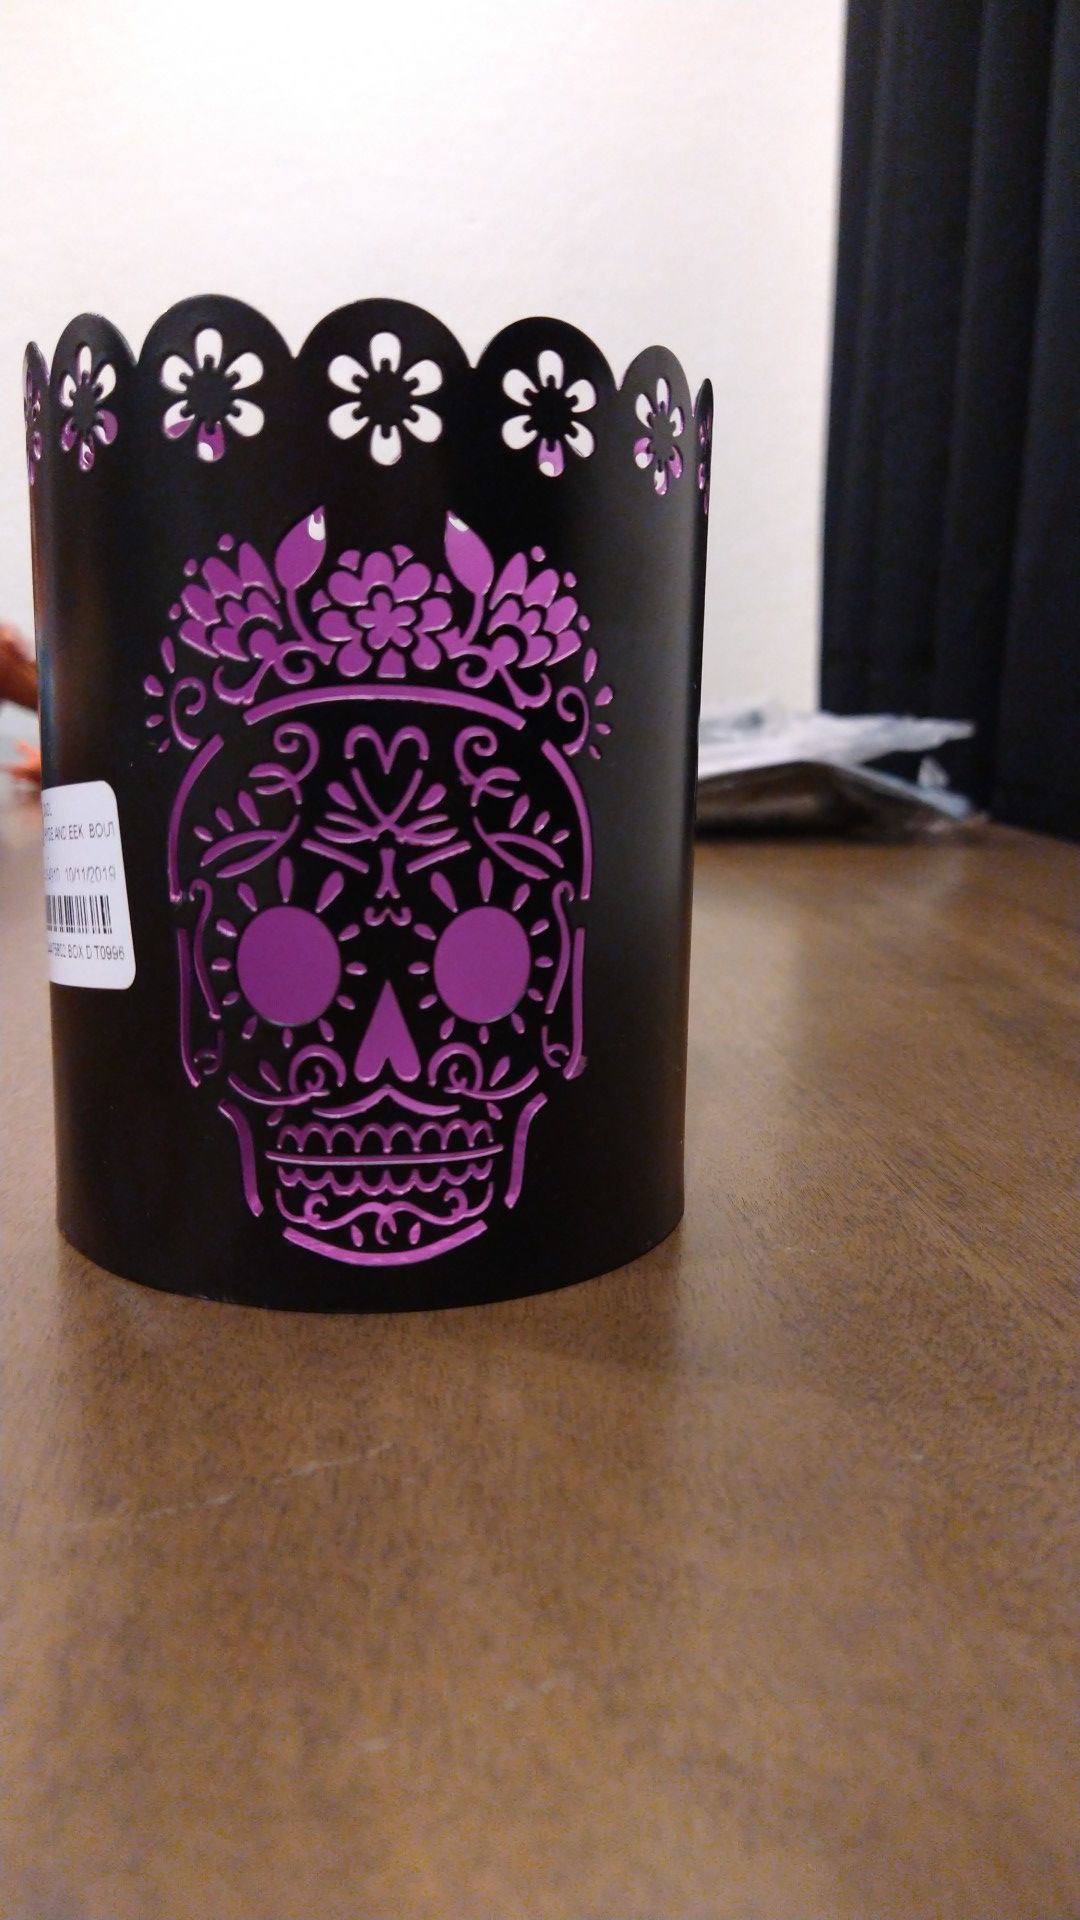 Day of the dead/ skull candle holder